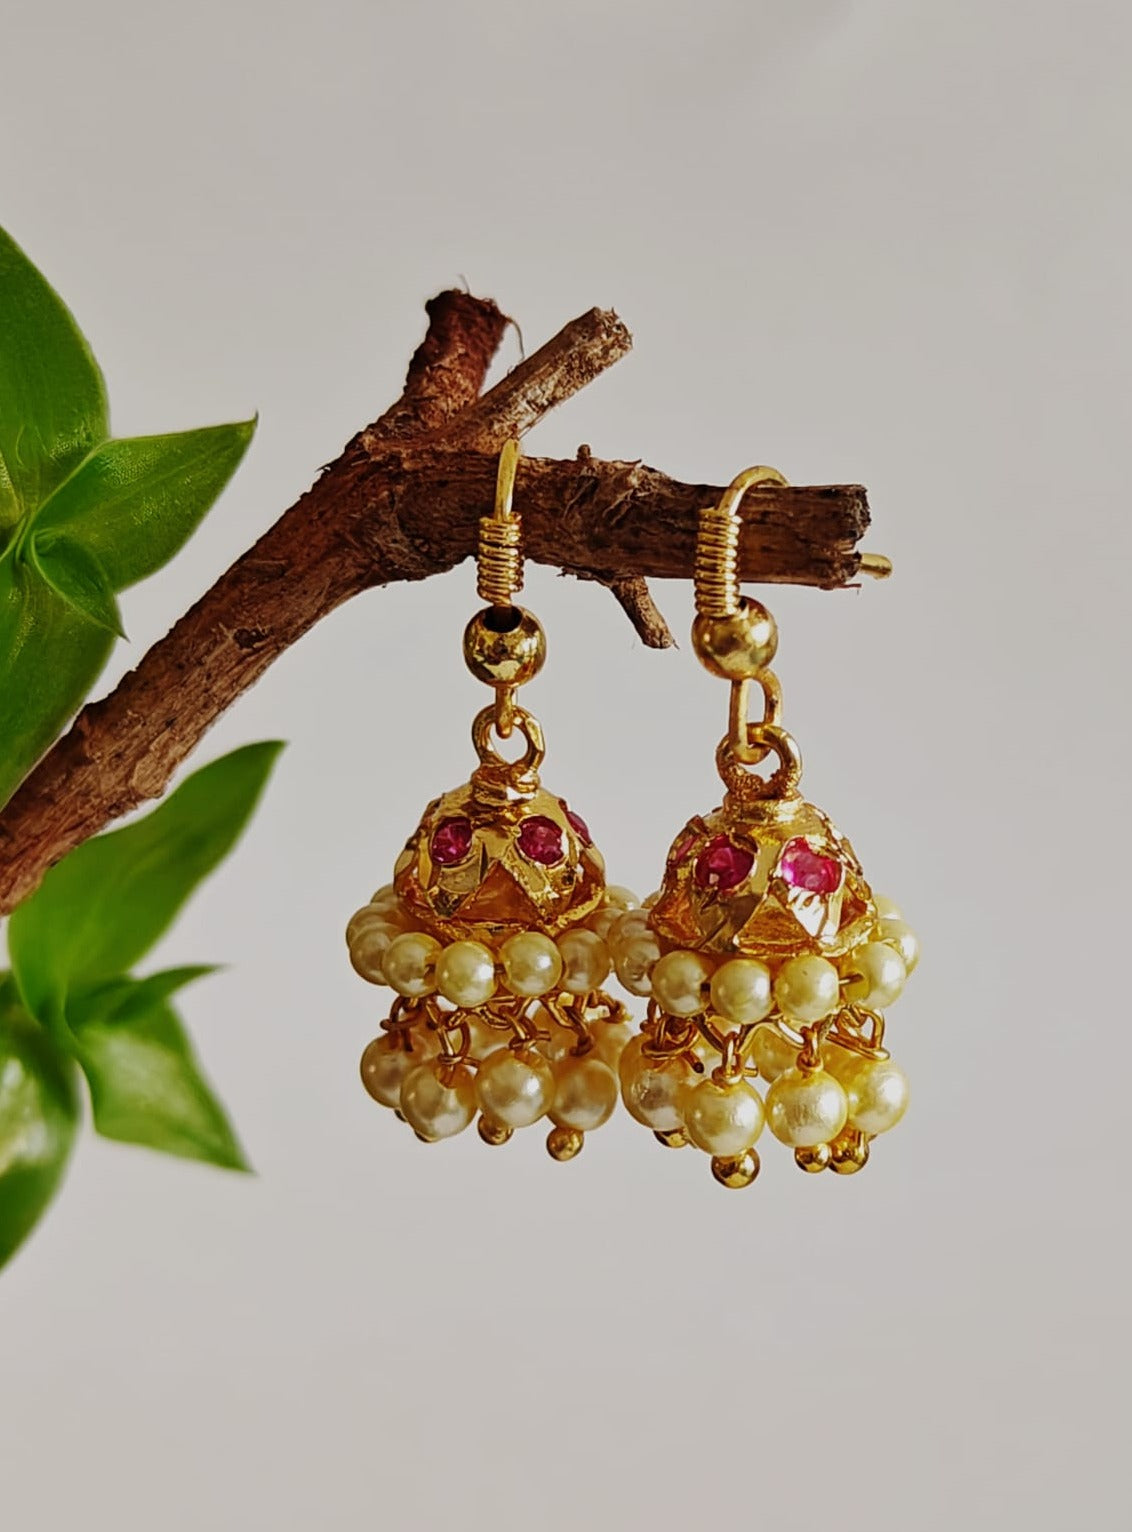 Pearls Jhumka - small size. Gold plated copper and silver alloy, make these jhumkas stay shiny as new for years. A must have piece of jewellery for a little girl